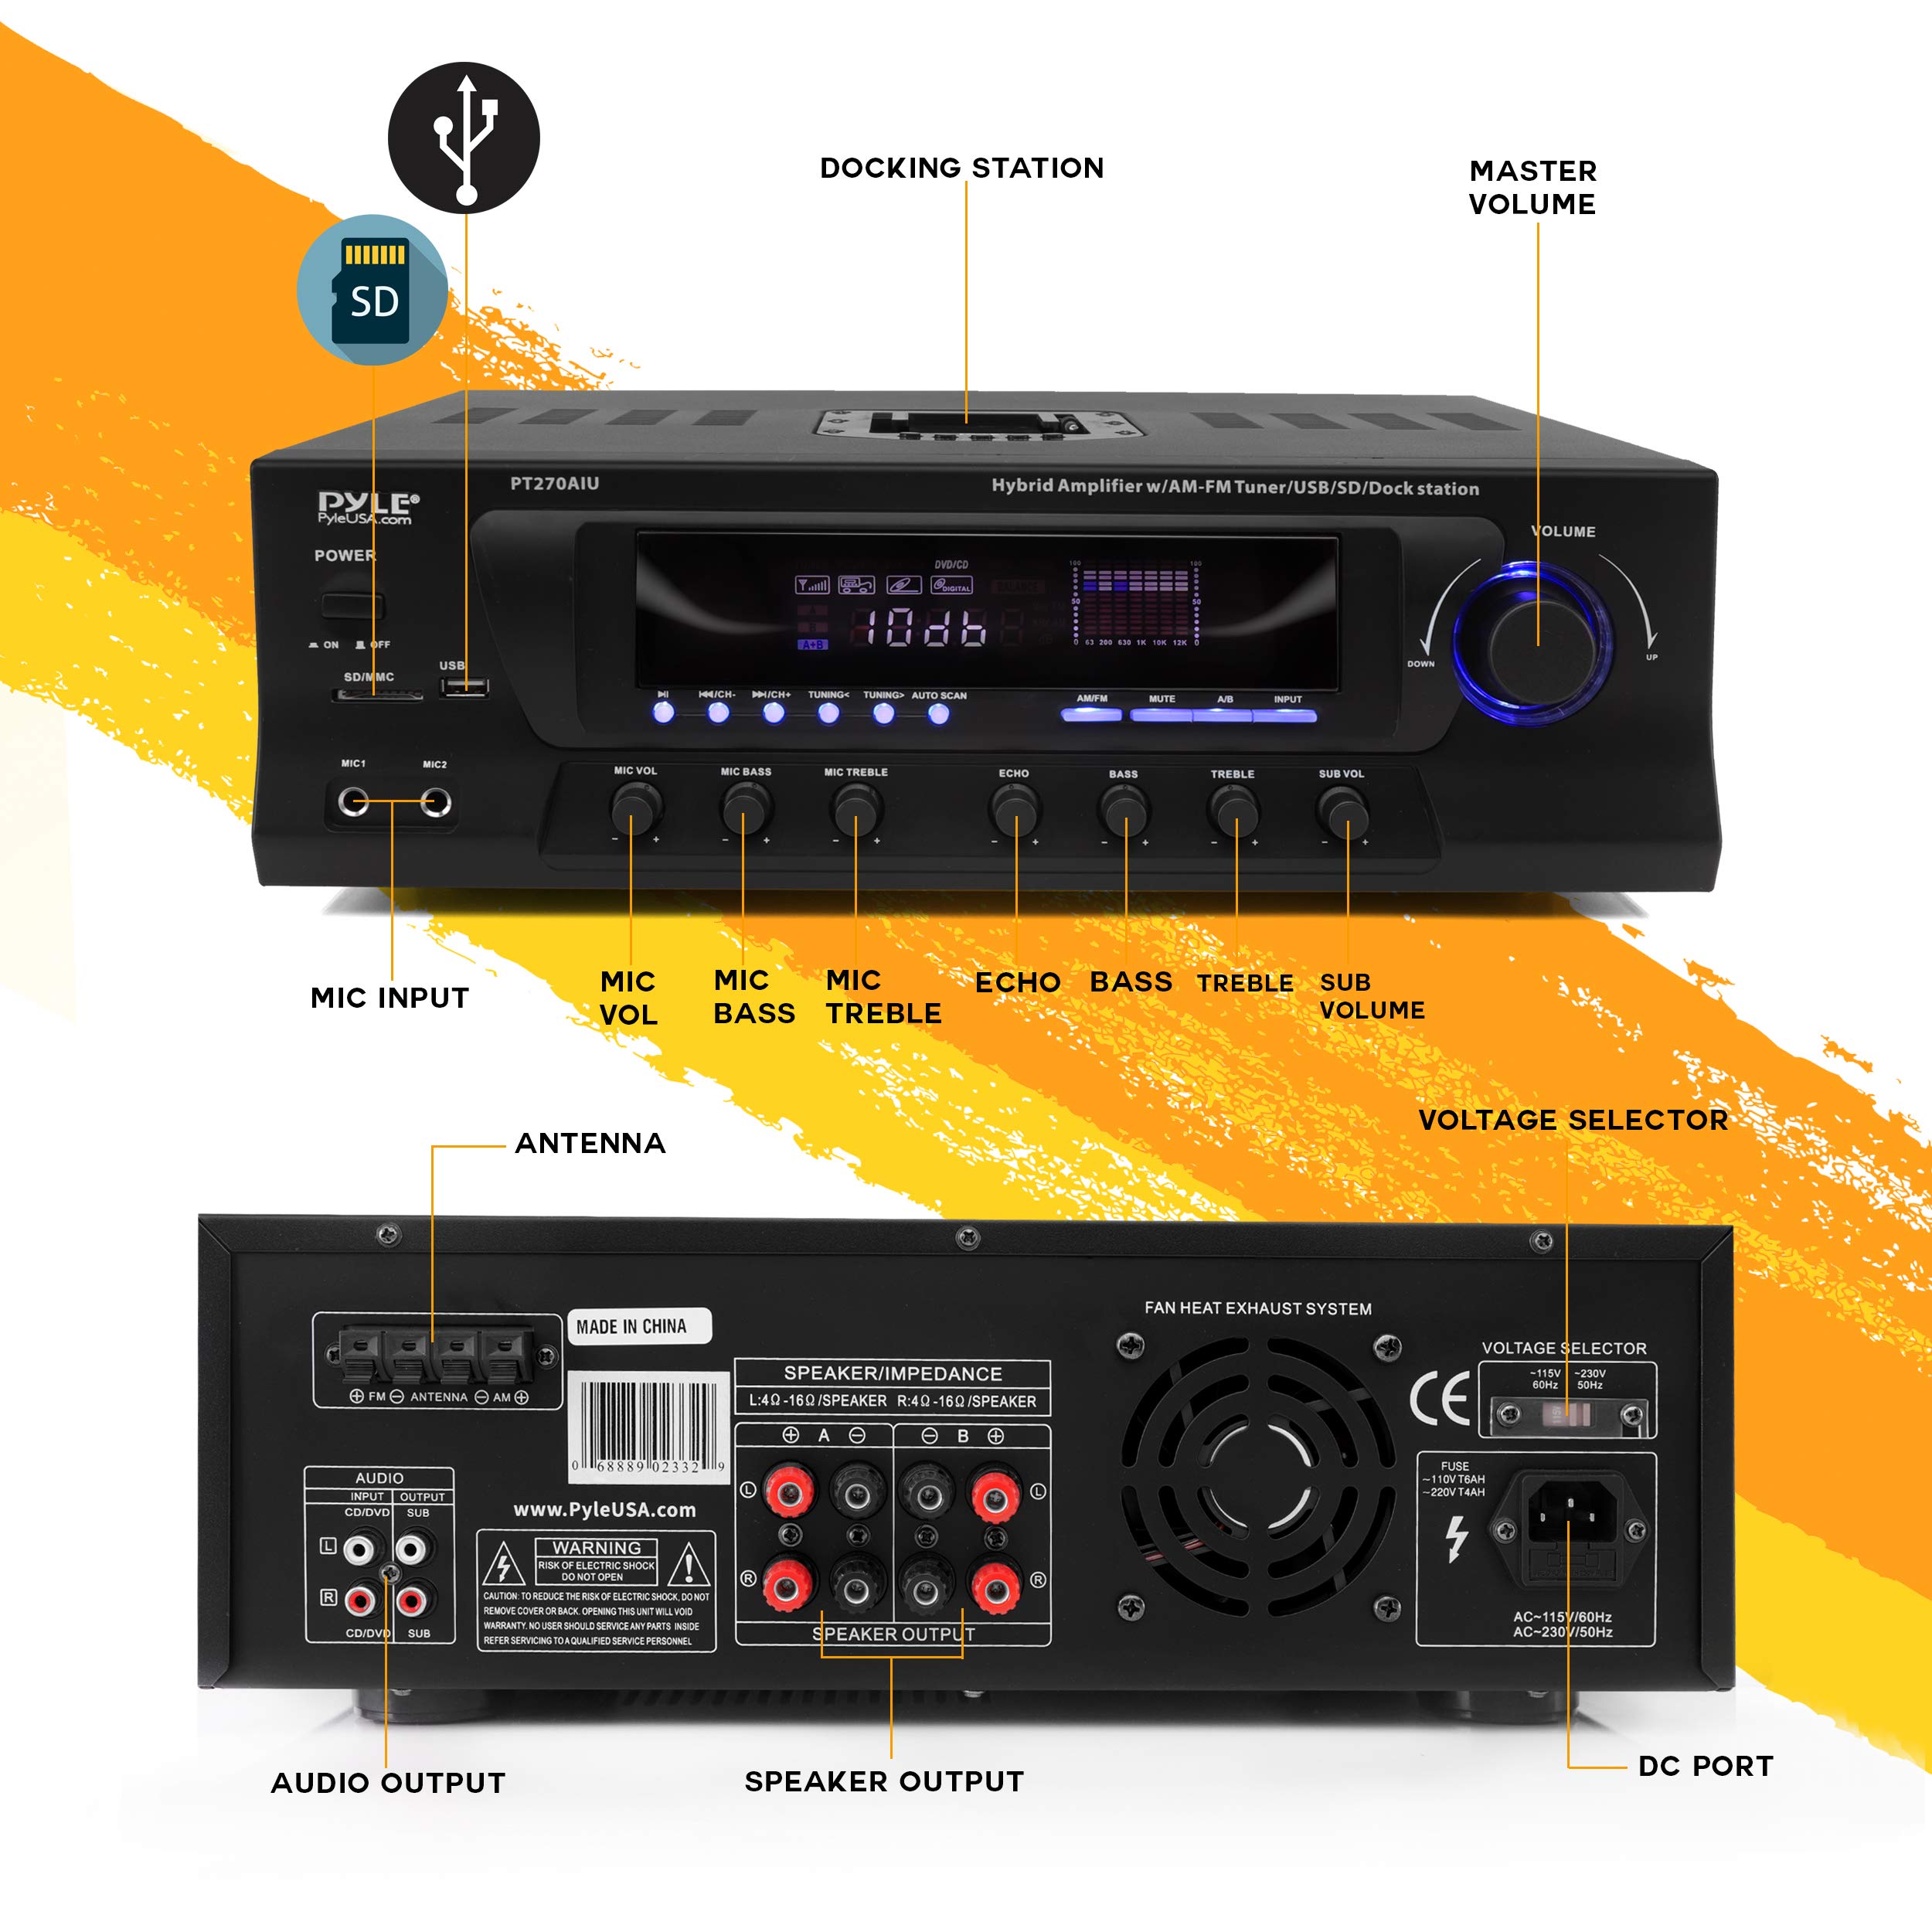 Pyle Home 300W Digital Stereo Receiver System - AM/FM Qtz. Tuner, USB/SD Card MP3 Player & Subwoofer Control, A/B Speaker, IPhone MP3 Input with Karaoke, Cable & Remote - PT270AIU